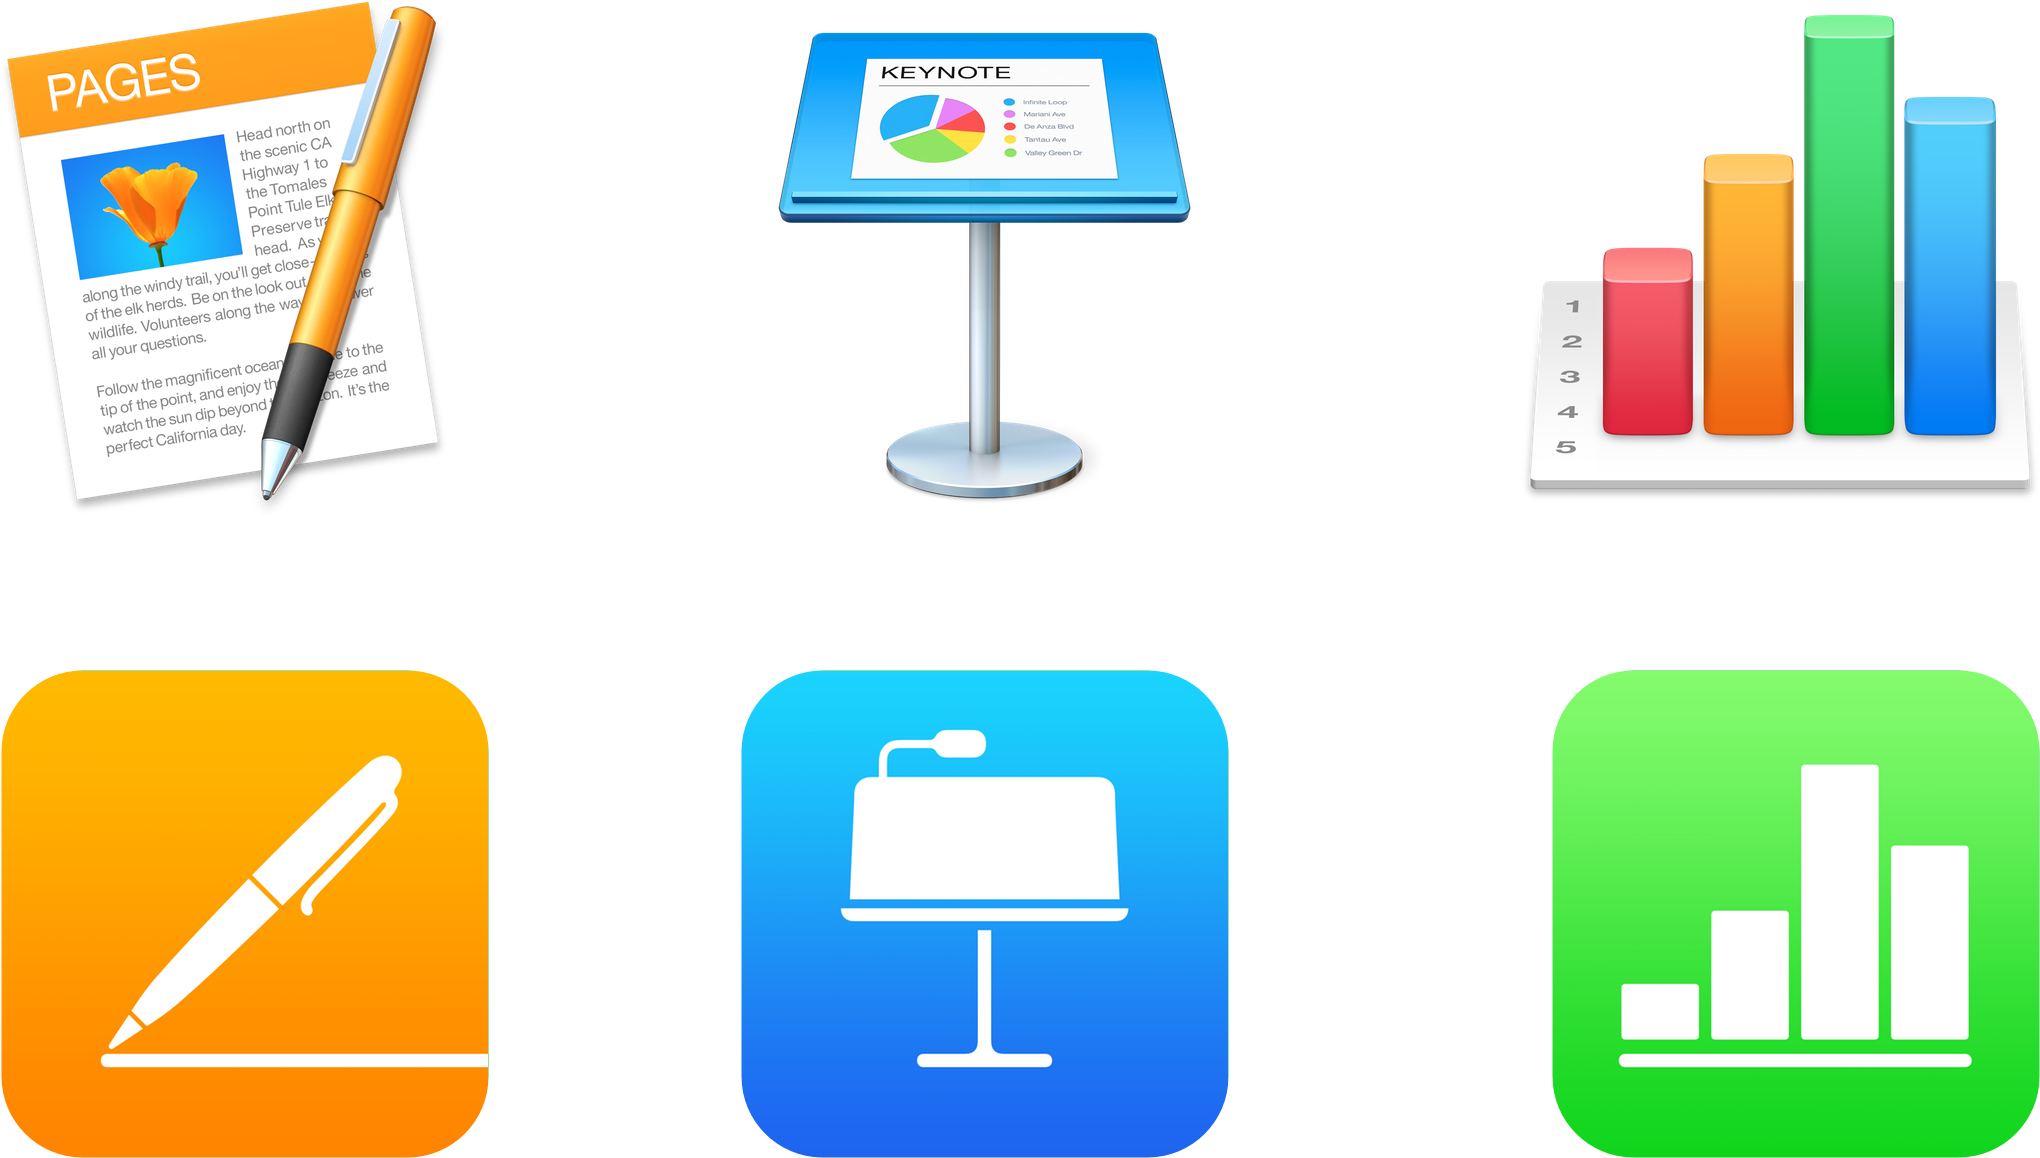 Apple Updates Iwork For Mac And Ios With Office Compatibility - Apple Iwork (2240x1316)